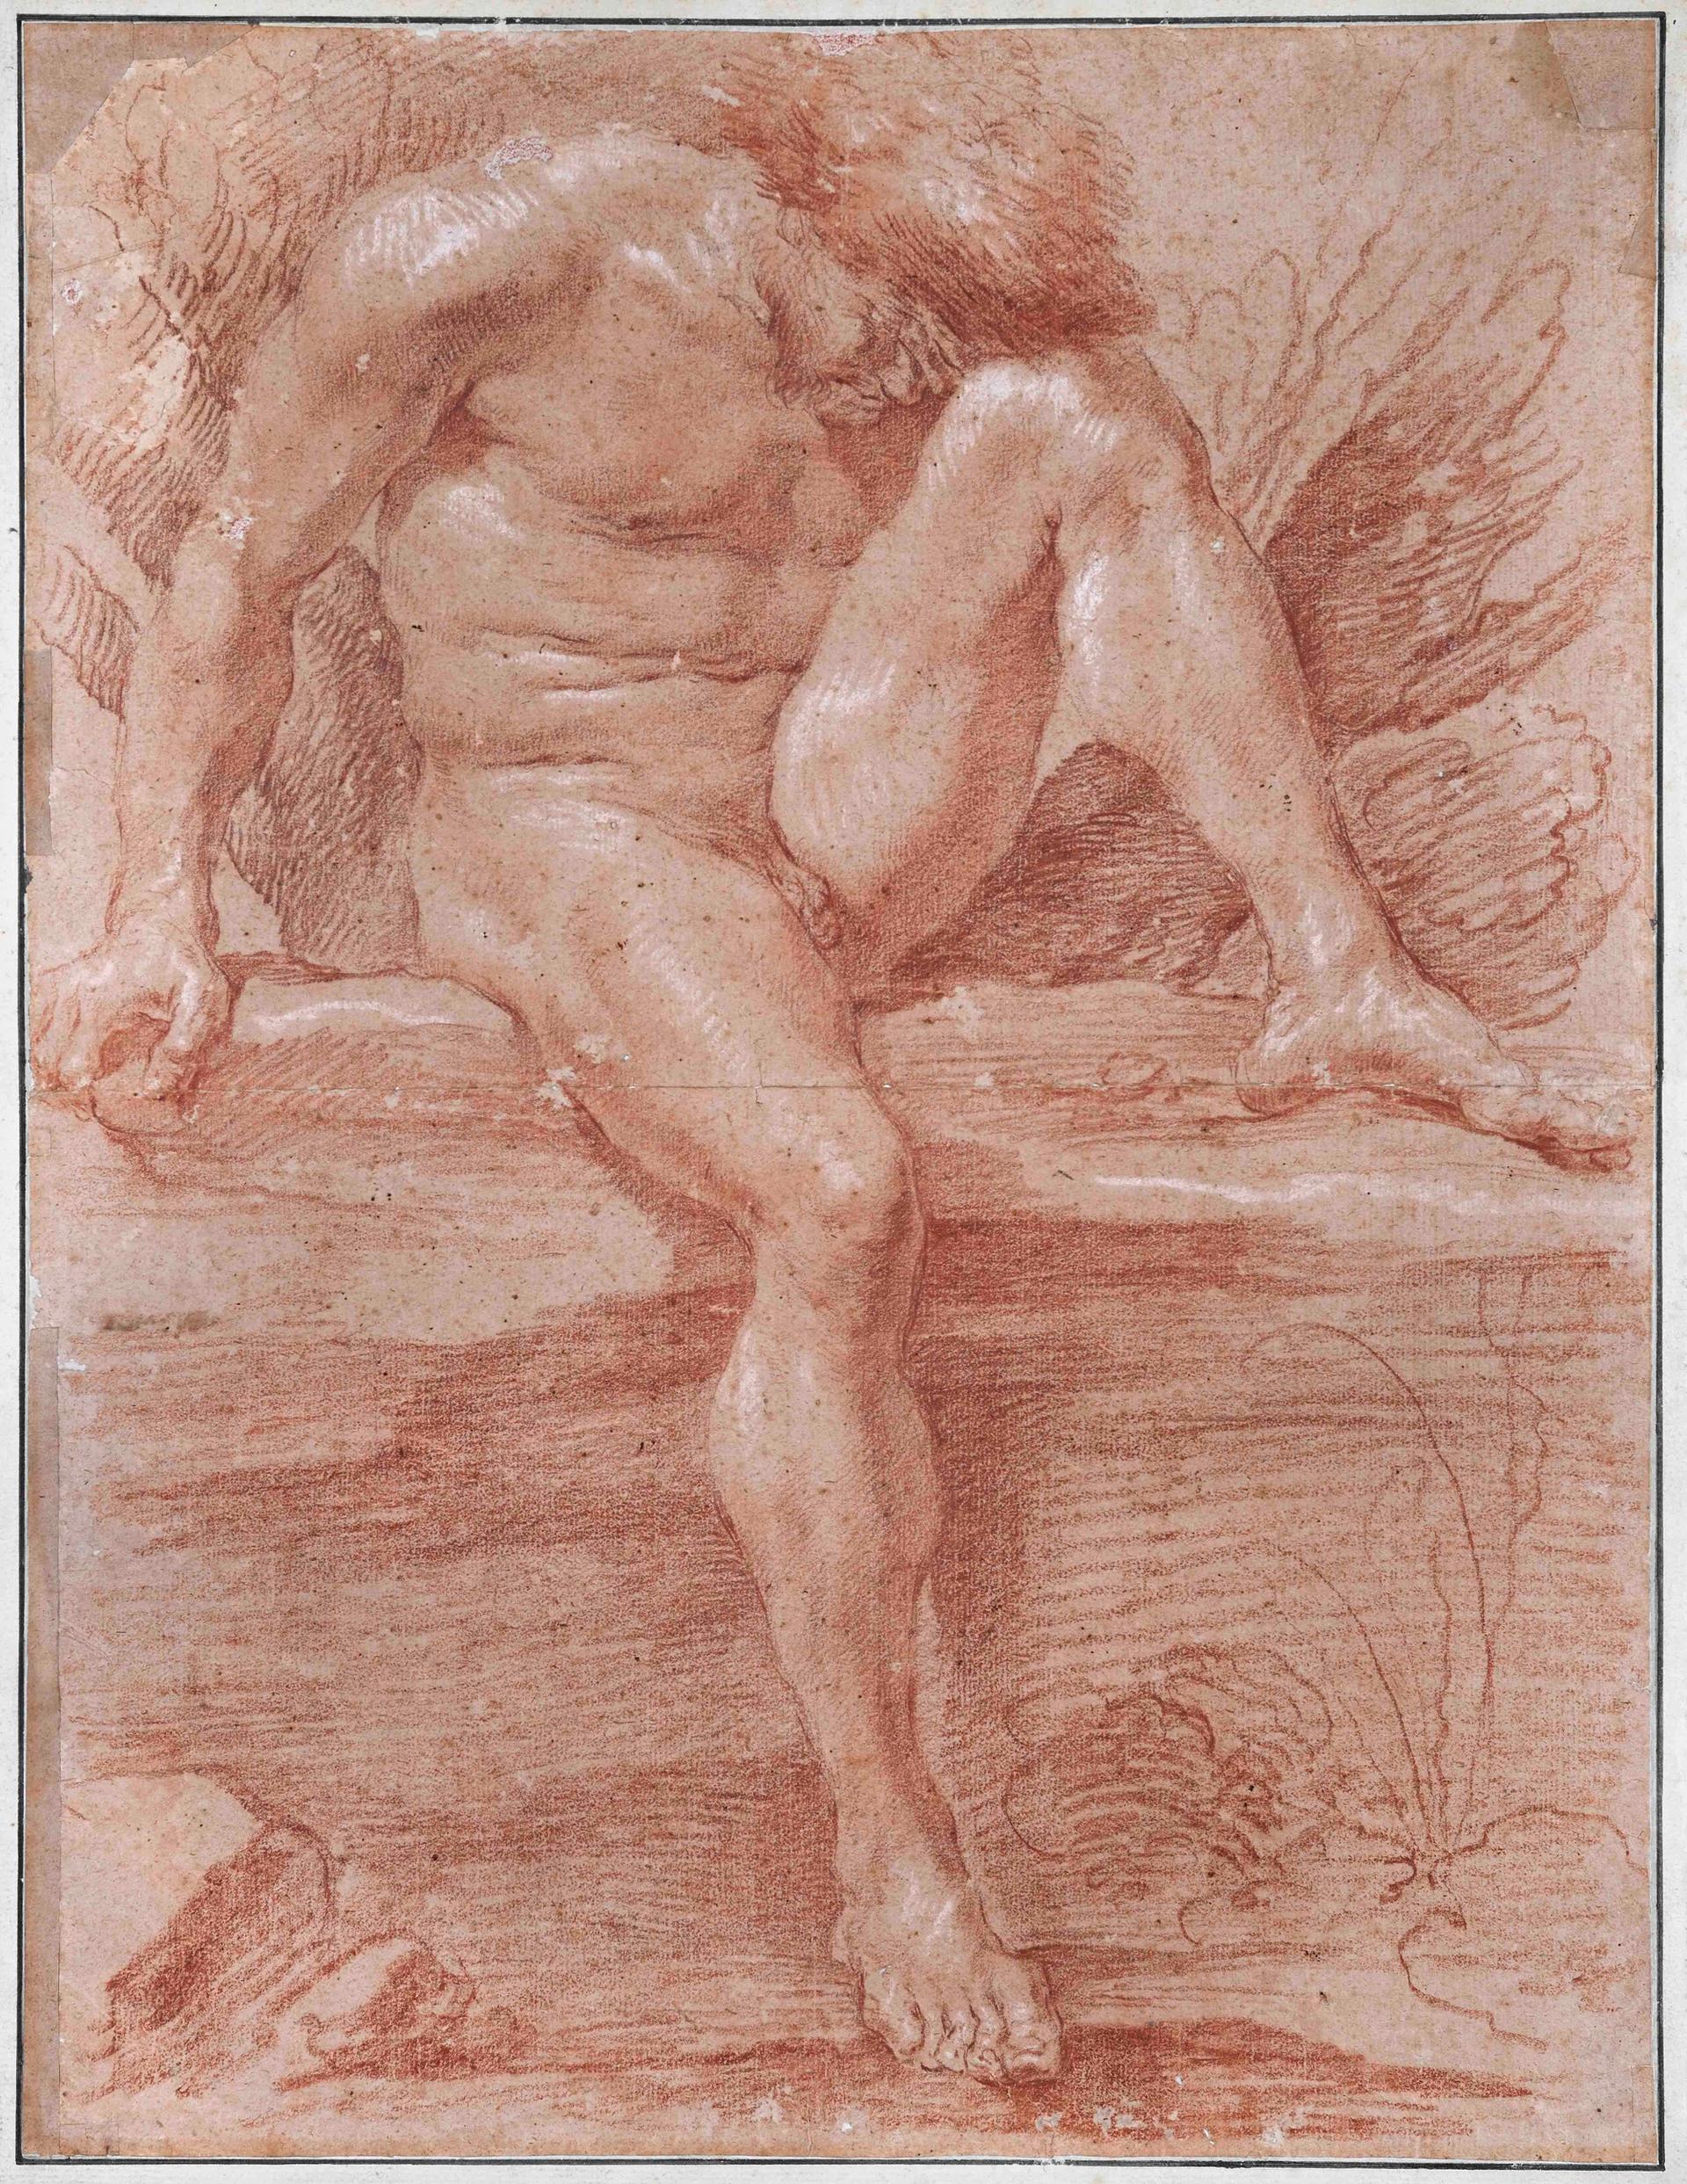 The drawing of a male nude, newly attributed to the 17th-century Italian sculptor Gian Lorenzo Bernini Courtesy of Actéon